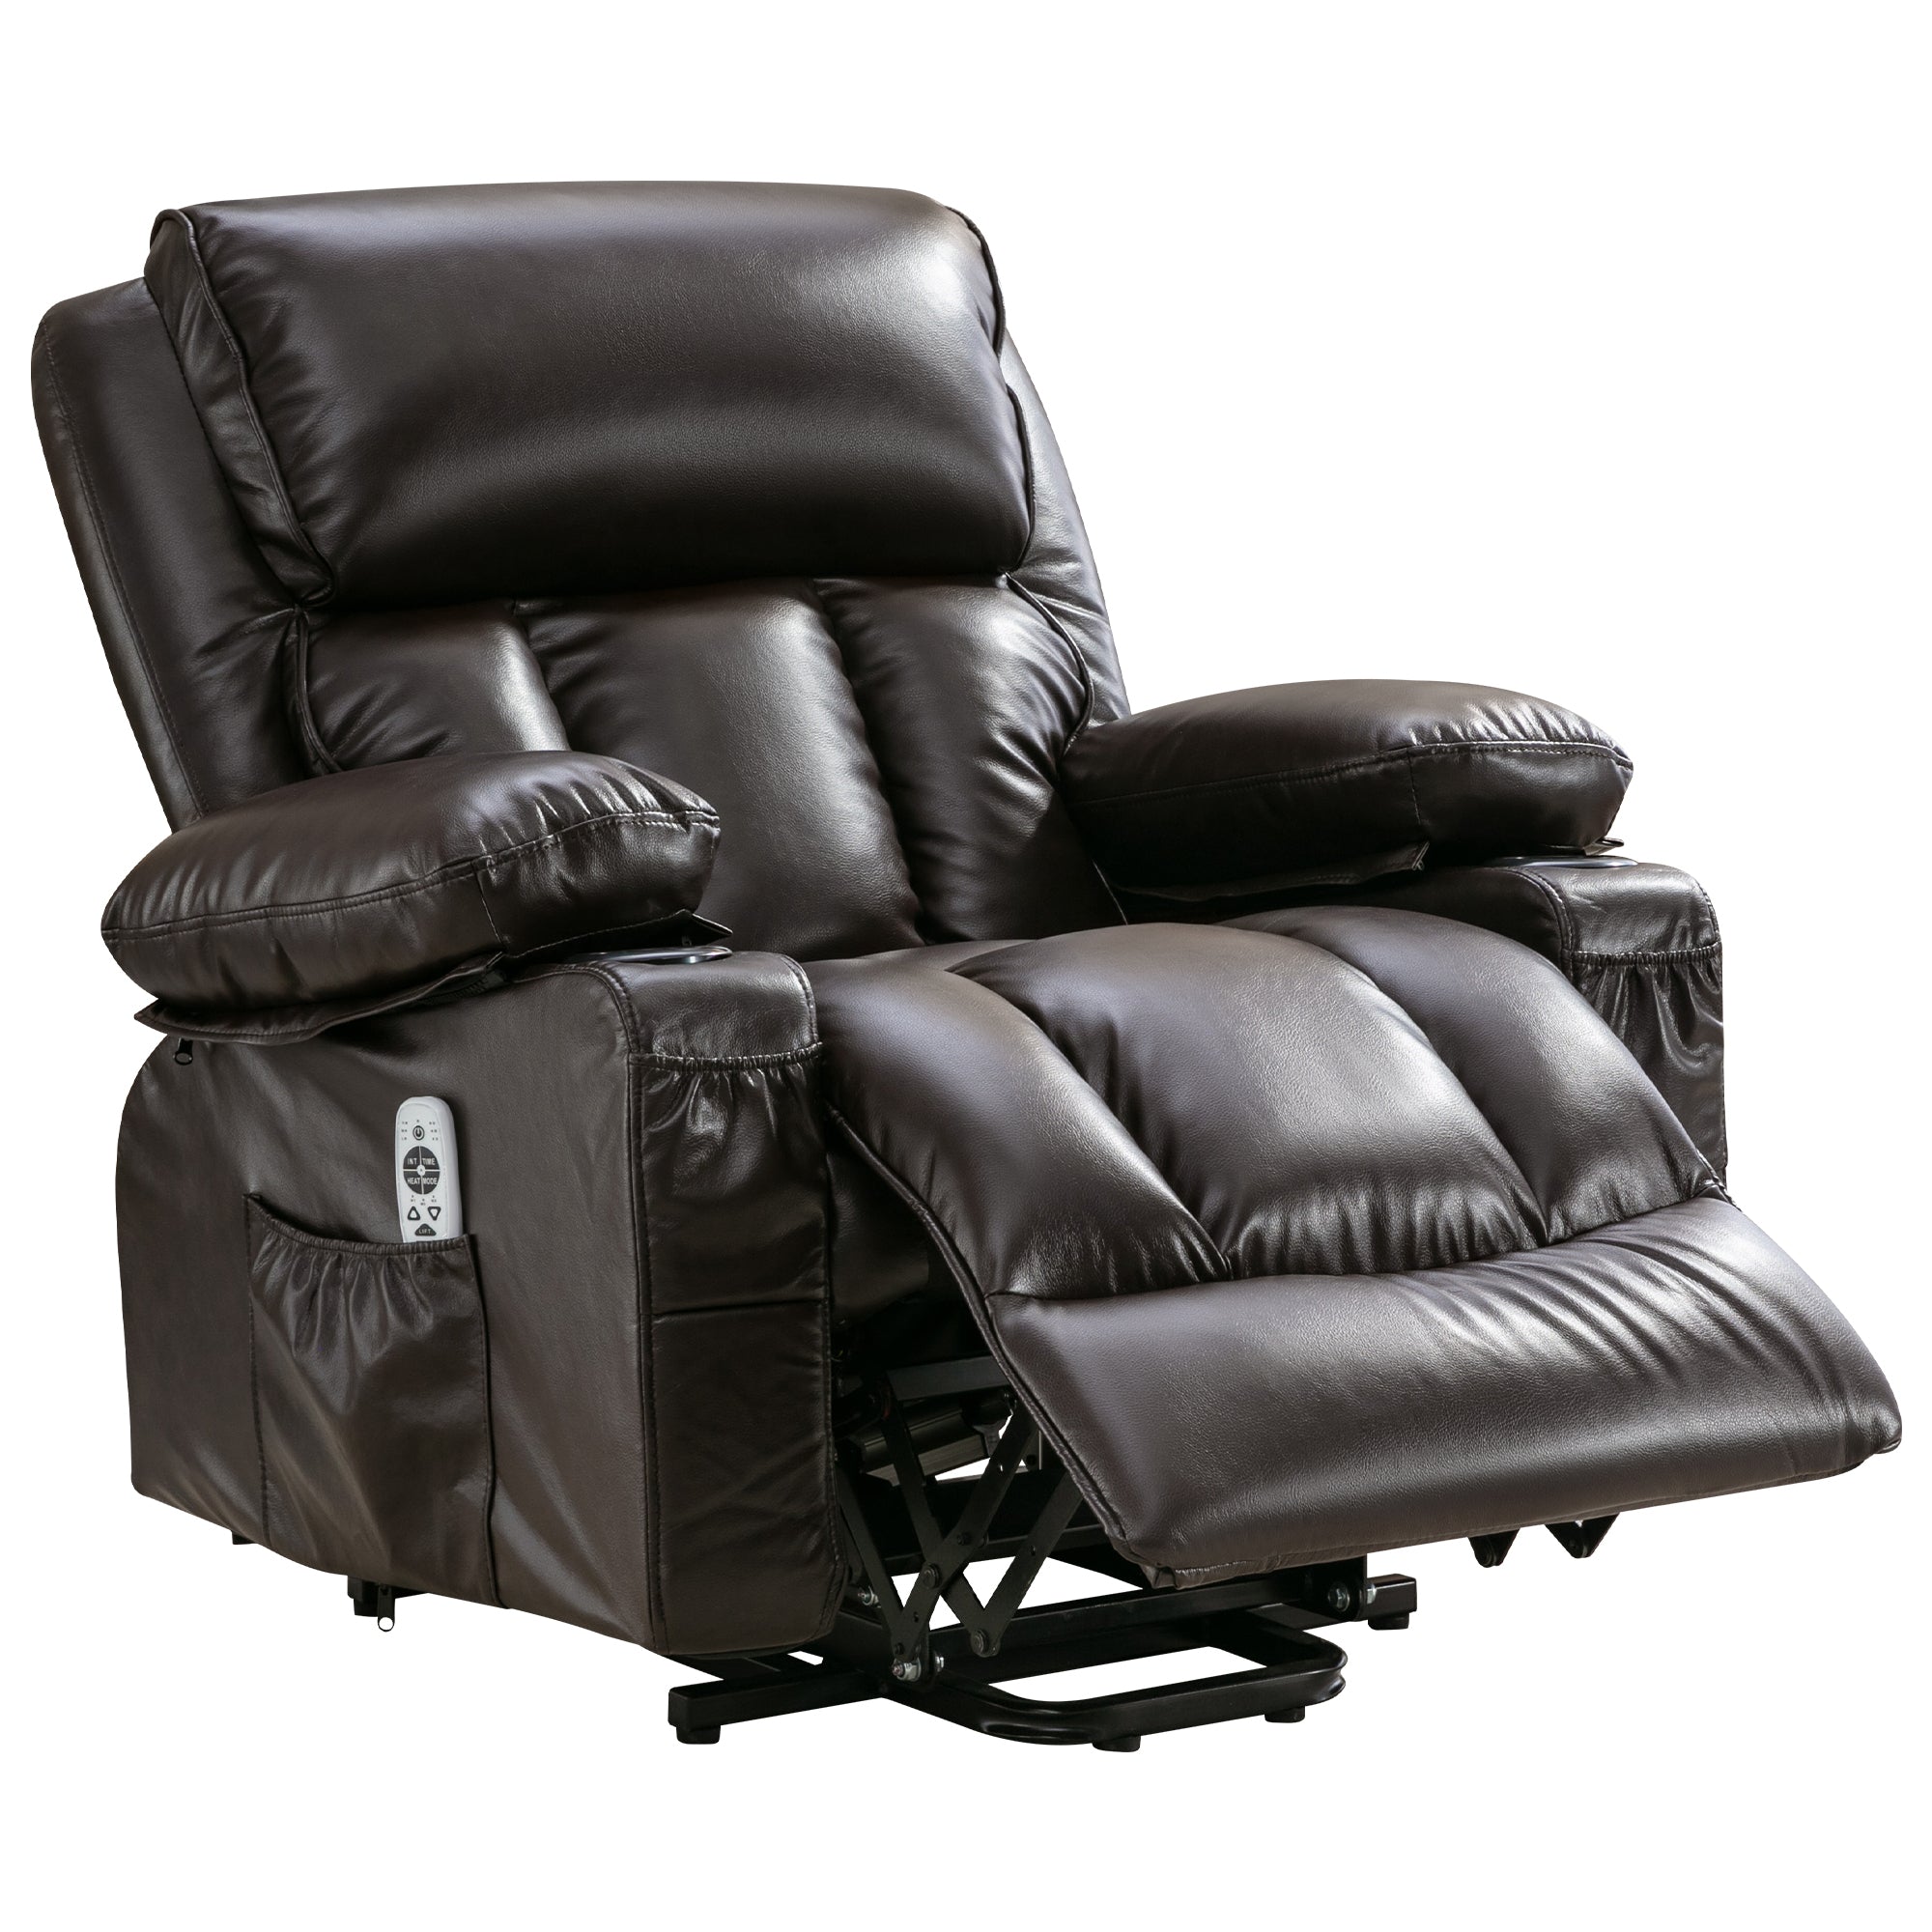 Power Lift Recliner Chair Recliners for Elderly with brown-power-push button-soft-heavy